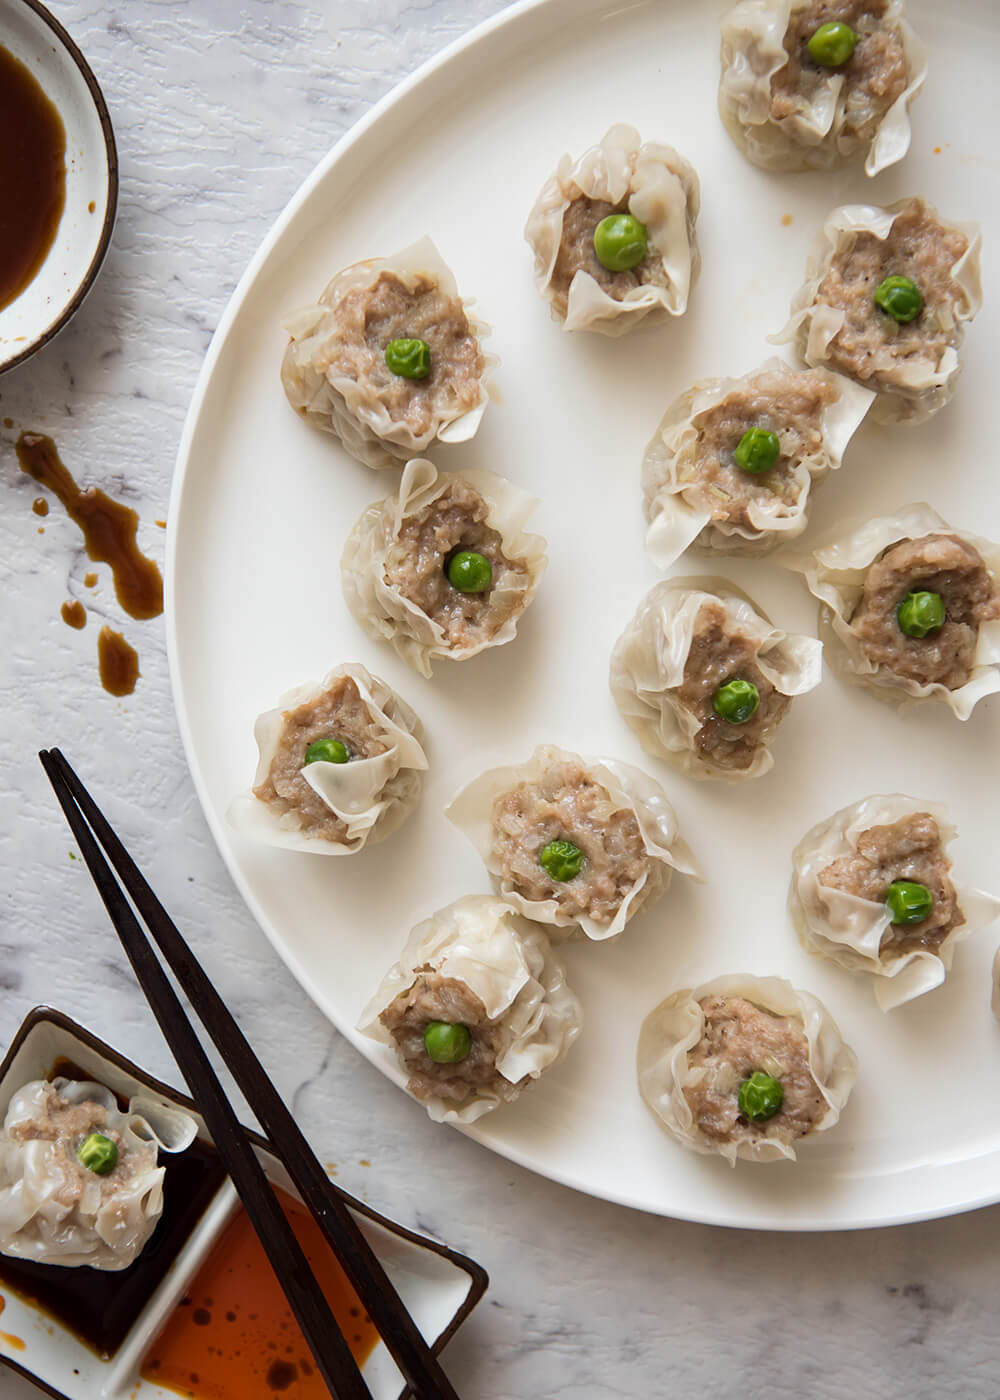 The Japanese version of steamed dumpling, shumai (or shao mai) is quite easy to make. It only contains pork mince, onion and few typical Japanese seasonings, but it tastes so good. 